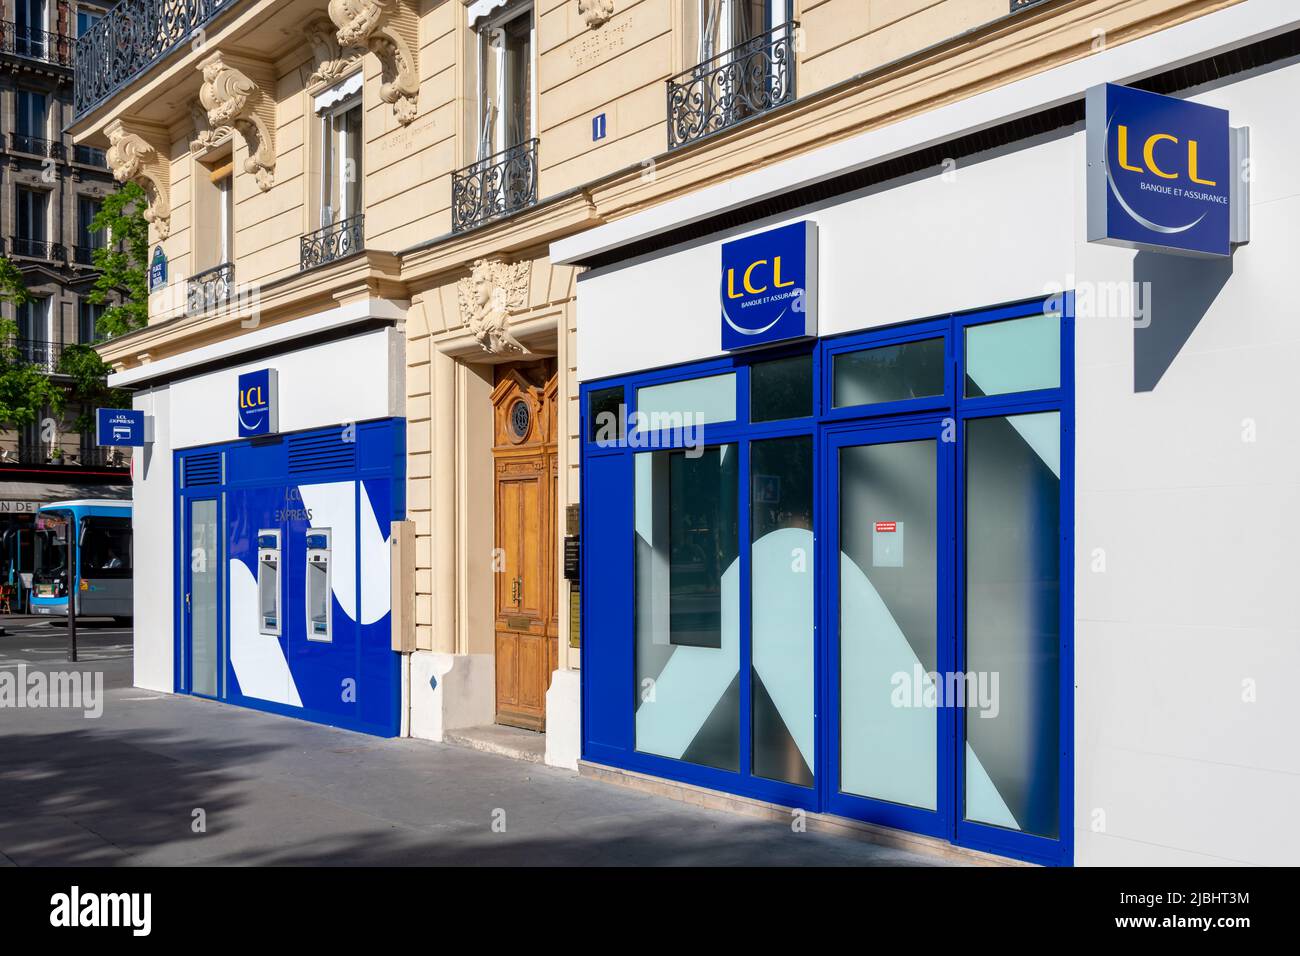 Exterior view of a branch of the French bank LCL (Le Credit Lyonnais in Paris, France Stock Photo